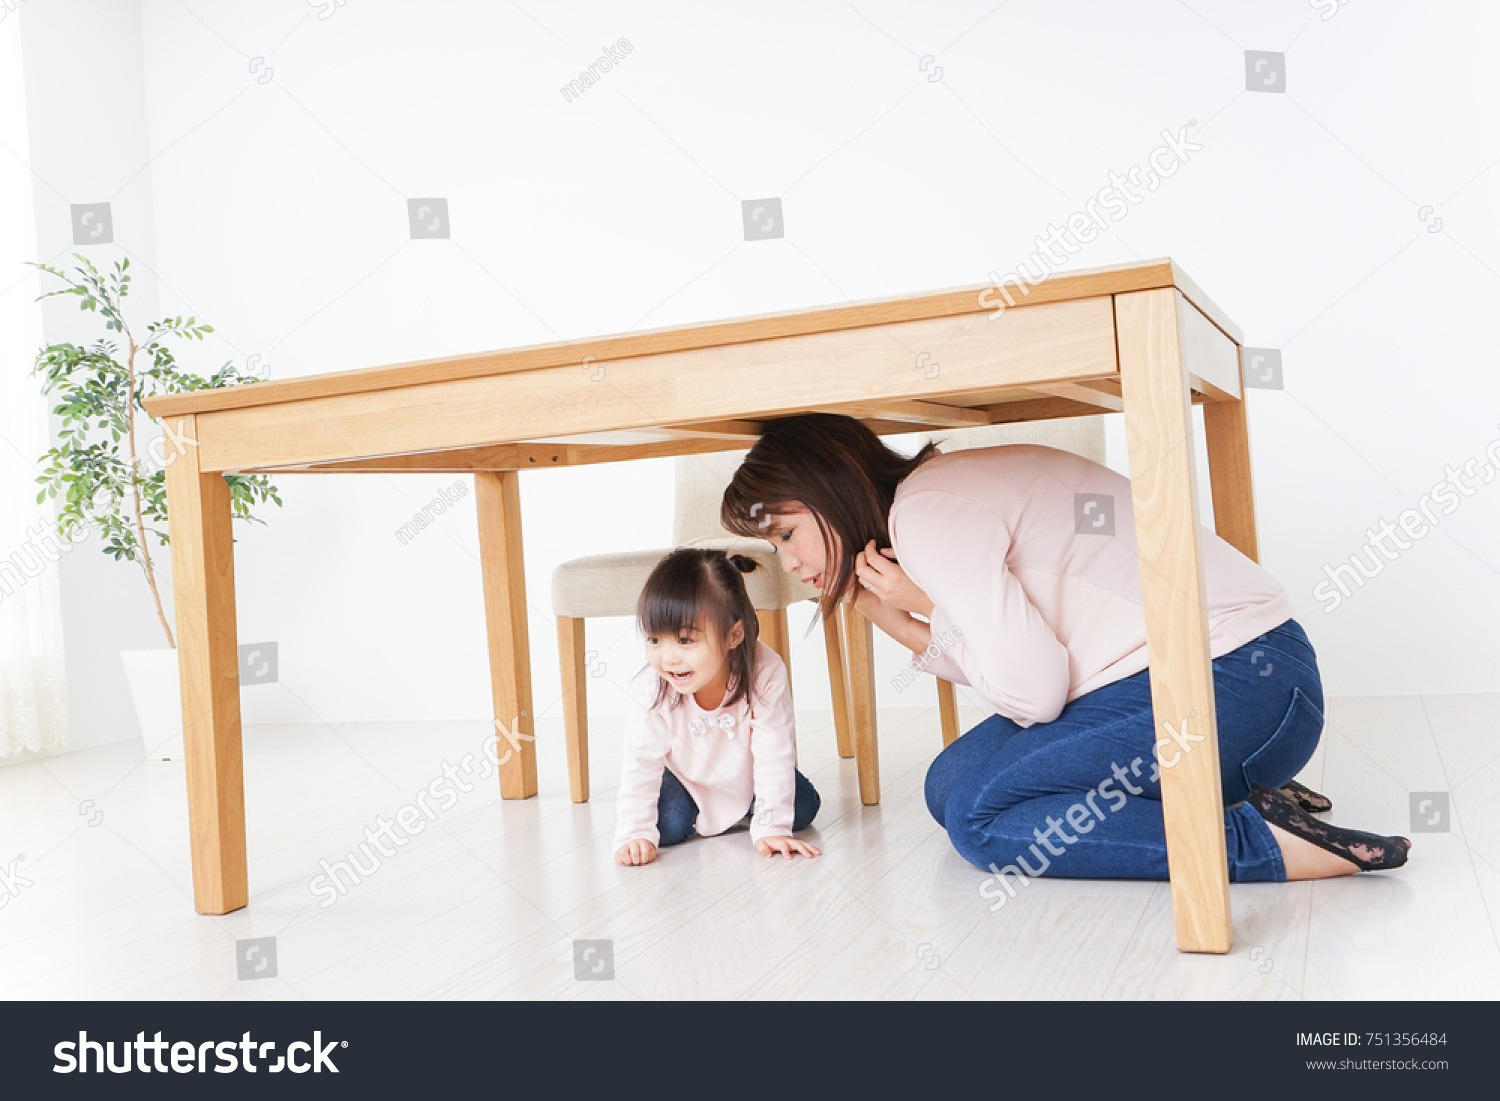 Under Table daughter